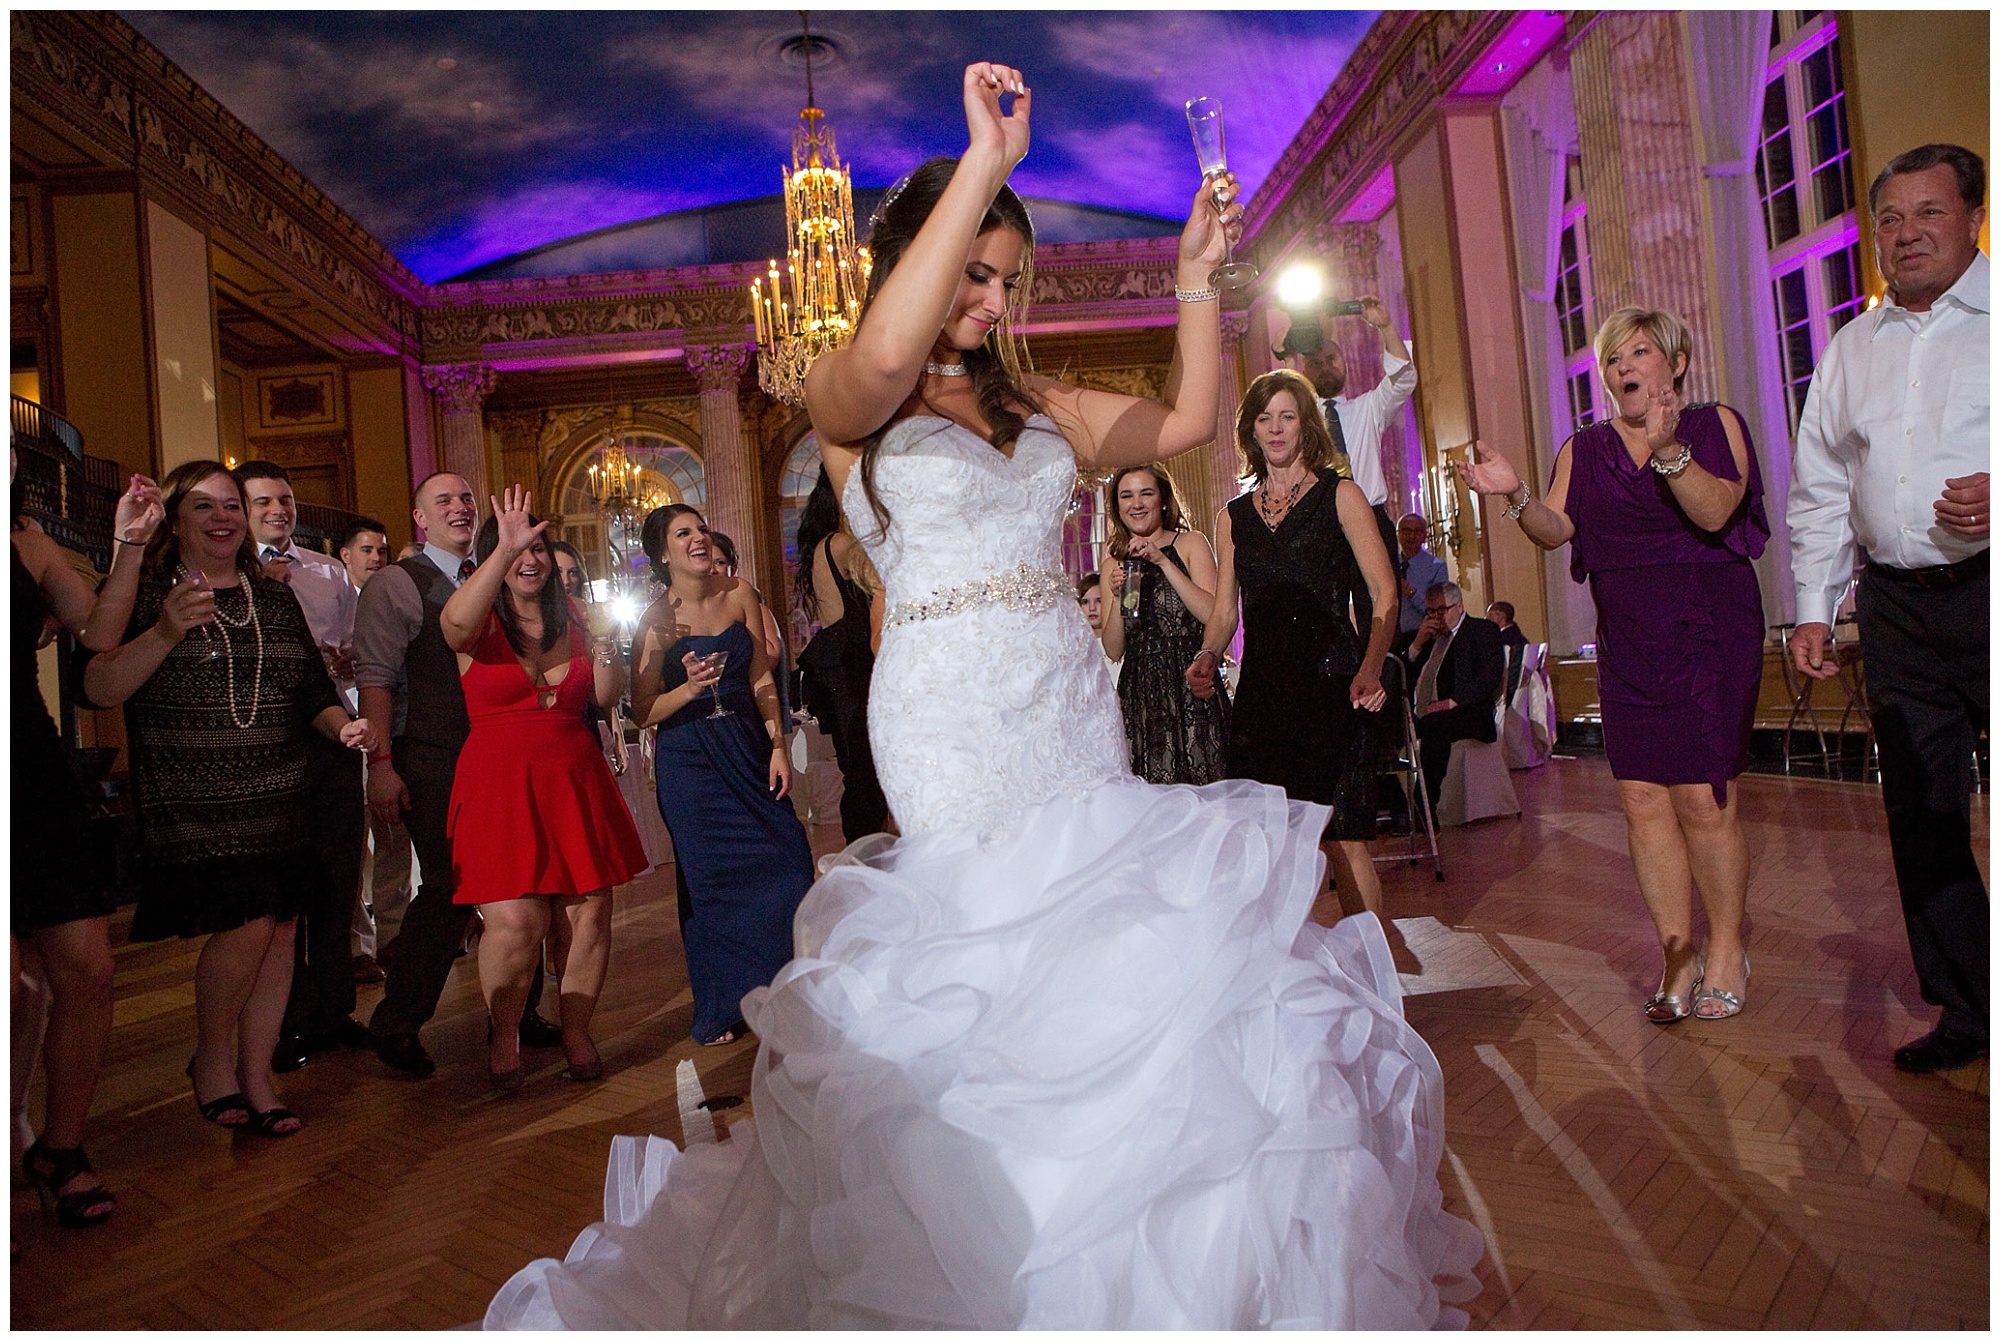 Photos of the bride on the dance floor with a glass of champagne in her hand.